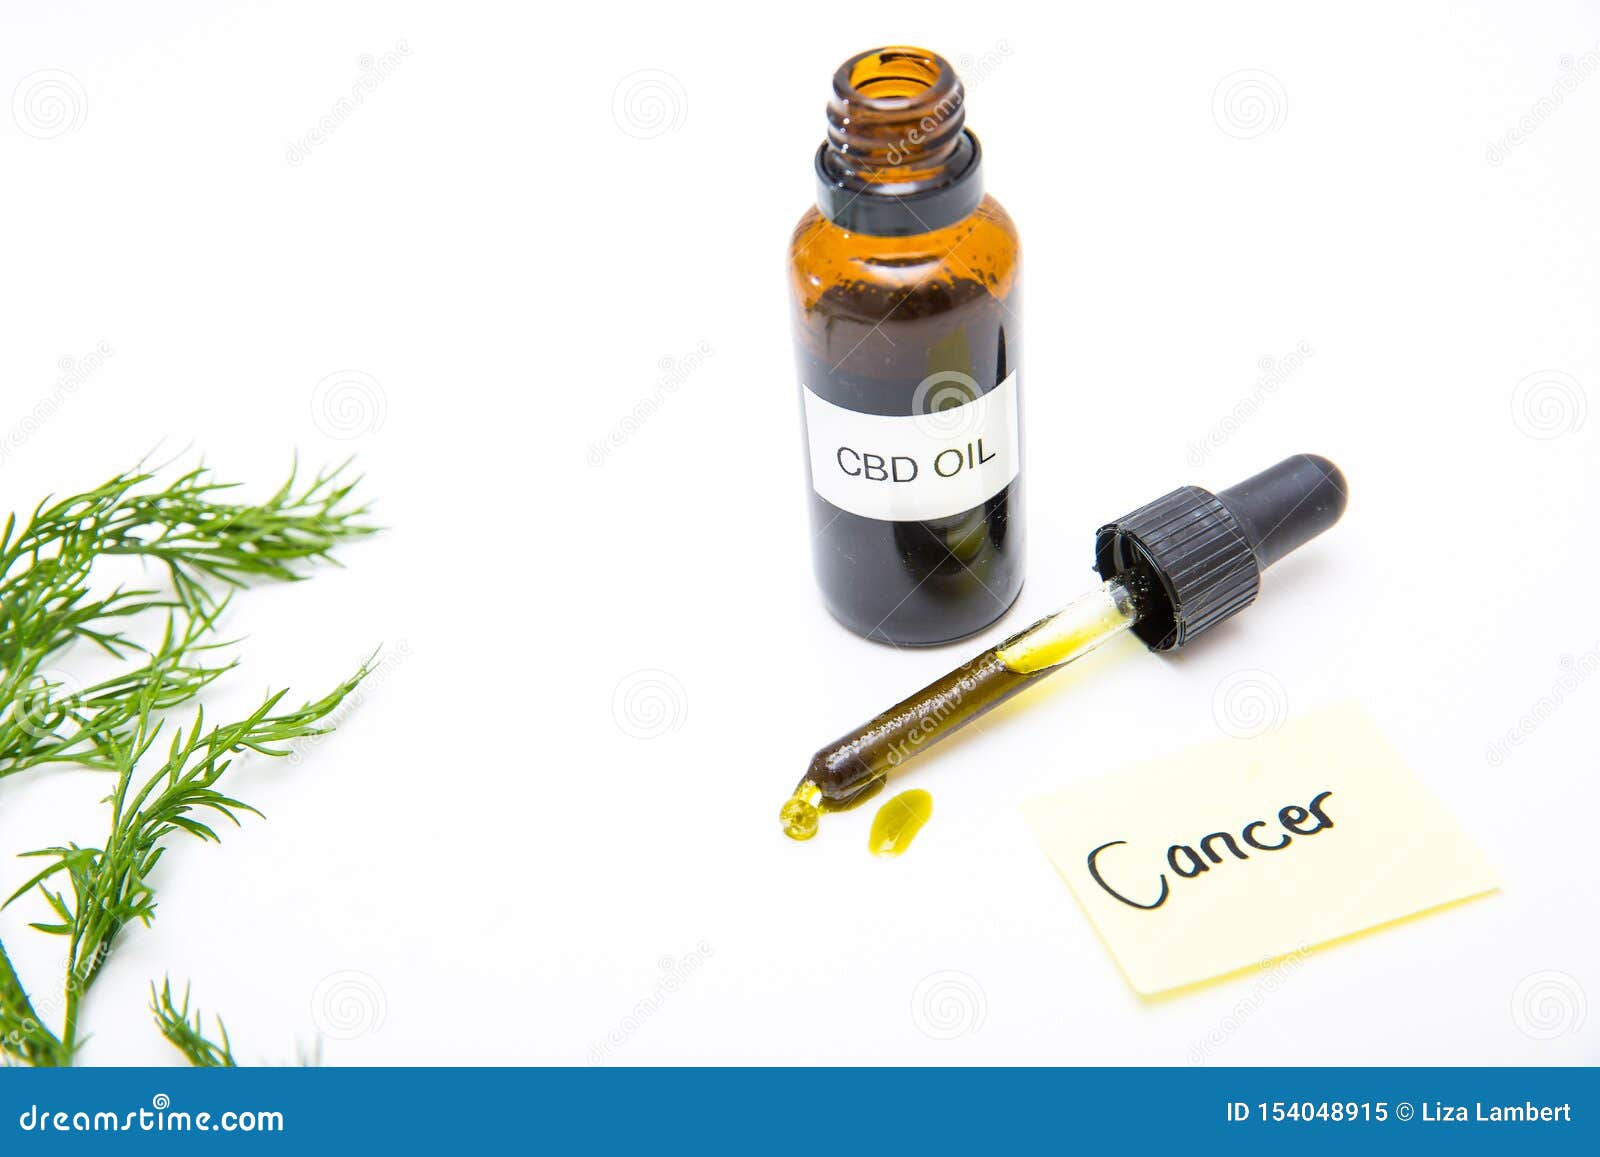 GOOGLE SCHOLOR CBC OIL - Cbd|Oil|Benefits|Cbc|Effects|Pain|Study|Health|Thc|Products|Cannabinoids|Studies|Research|Anxiety|Cannabis|Symptoms|Evidence|People|System|Disease|Treatment|Inflammation|Hemp|Body|Receptors|Disorders|Brain|Plant|Cells|Side|Effect|Blood|Patients|Cancer|Product|Skin|Marijuana|Properties|Cannabidiol|Cannabinoid|Cbd Oil|Cbd Products|Cbc Oil|Side Effects|Endocannabinoid System|Chronic Pain|Multiple Sclerosis|Pain Relief|Cannabis Plant|Cbd Oil Benefits|Blood Pressure|Health Benefits|High Blood Pressure|Anti-Inflammatory Properties|Neuropathic Pain|Animal Studies|Hemp Plant|Hemp Oil|Anxiety Disorders|Cbd Product|Immune System|Clinical Trials|Cbd Gummies|Nerve Cells|Nervous System|Entourage Effect|Hemp Seed Oil|United States|Cbd Oils|Drug Administration